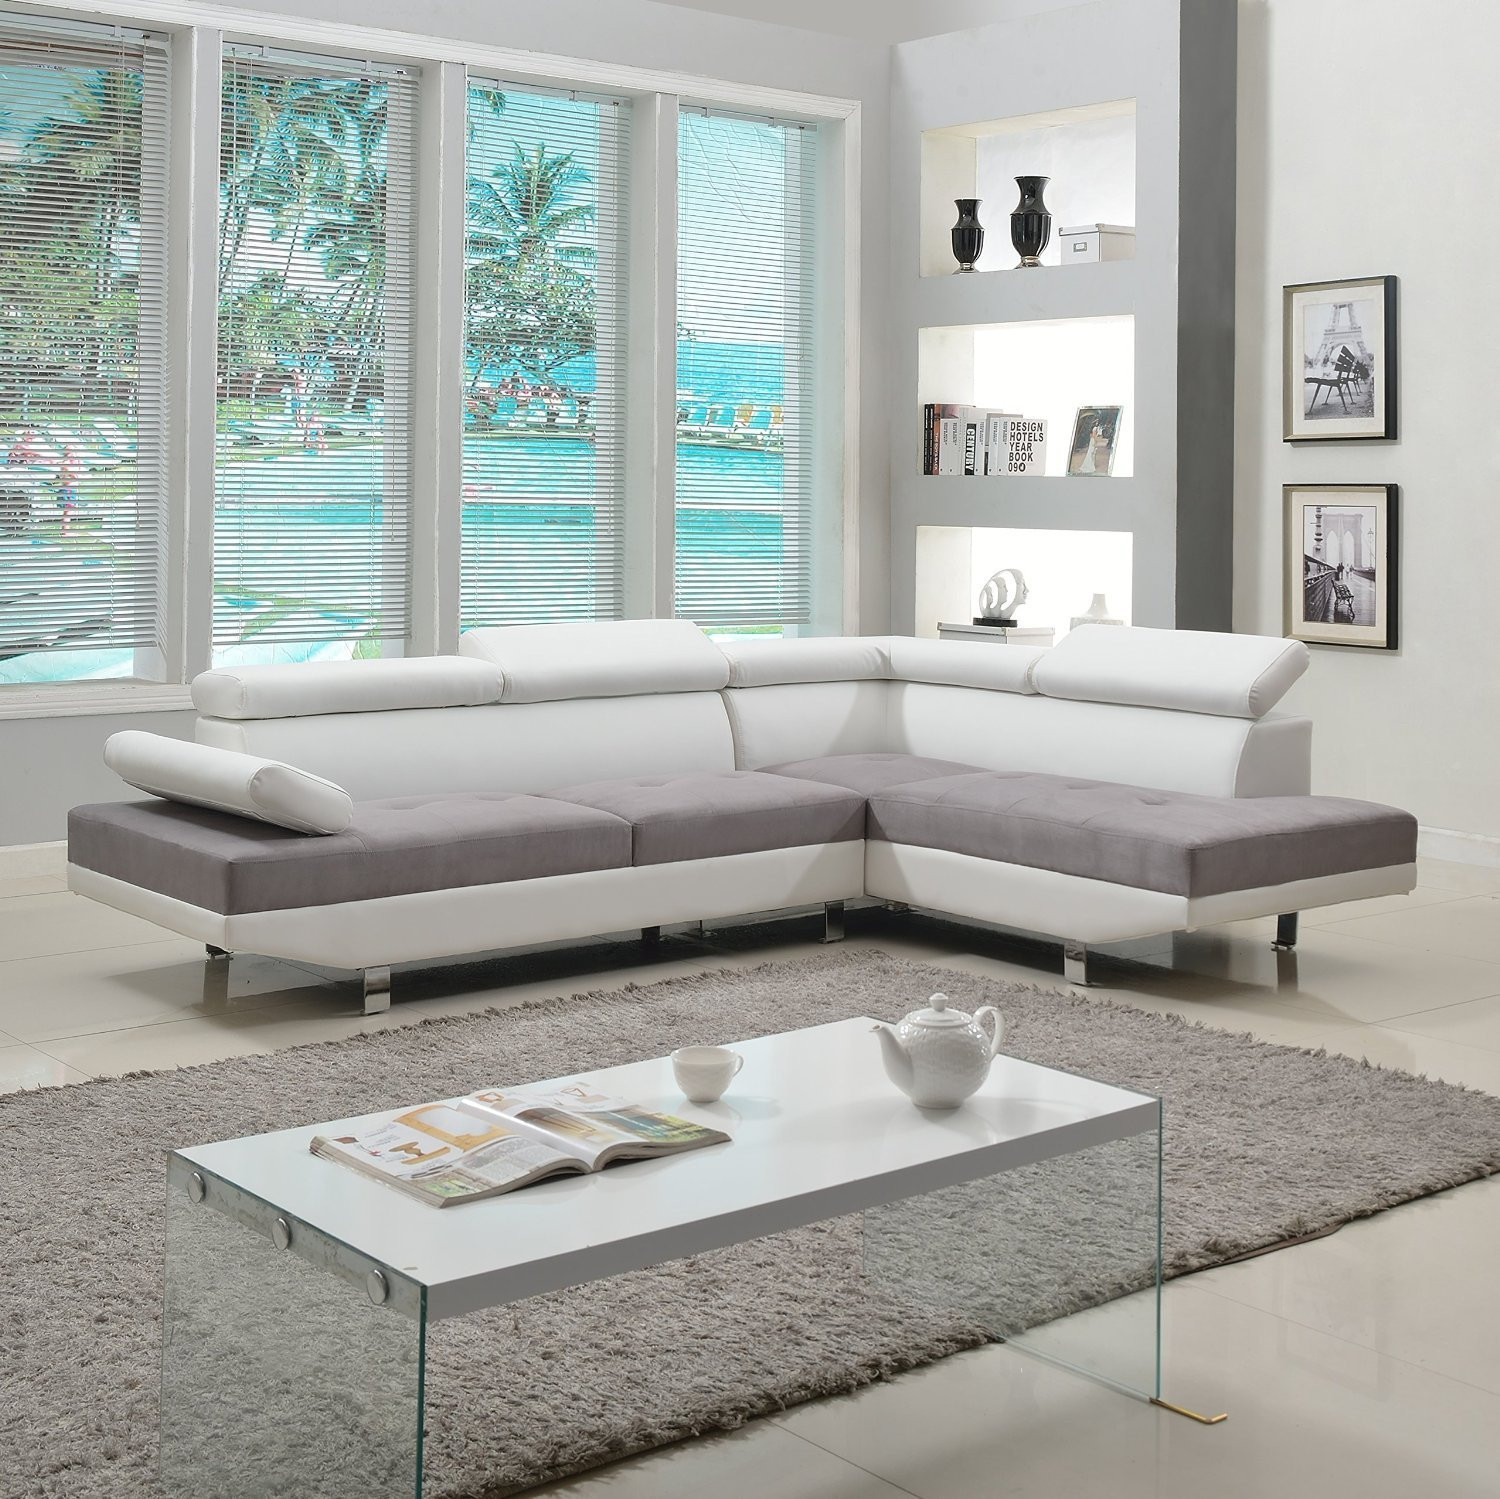 Modern White Living Room Furniture
 Modern Living Room Furniture Review – Find the Best e